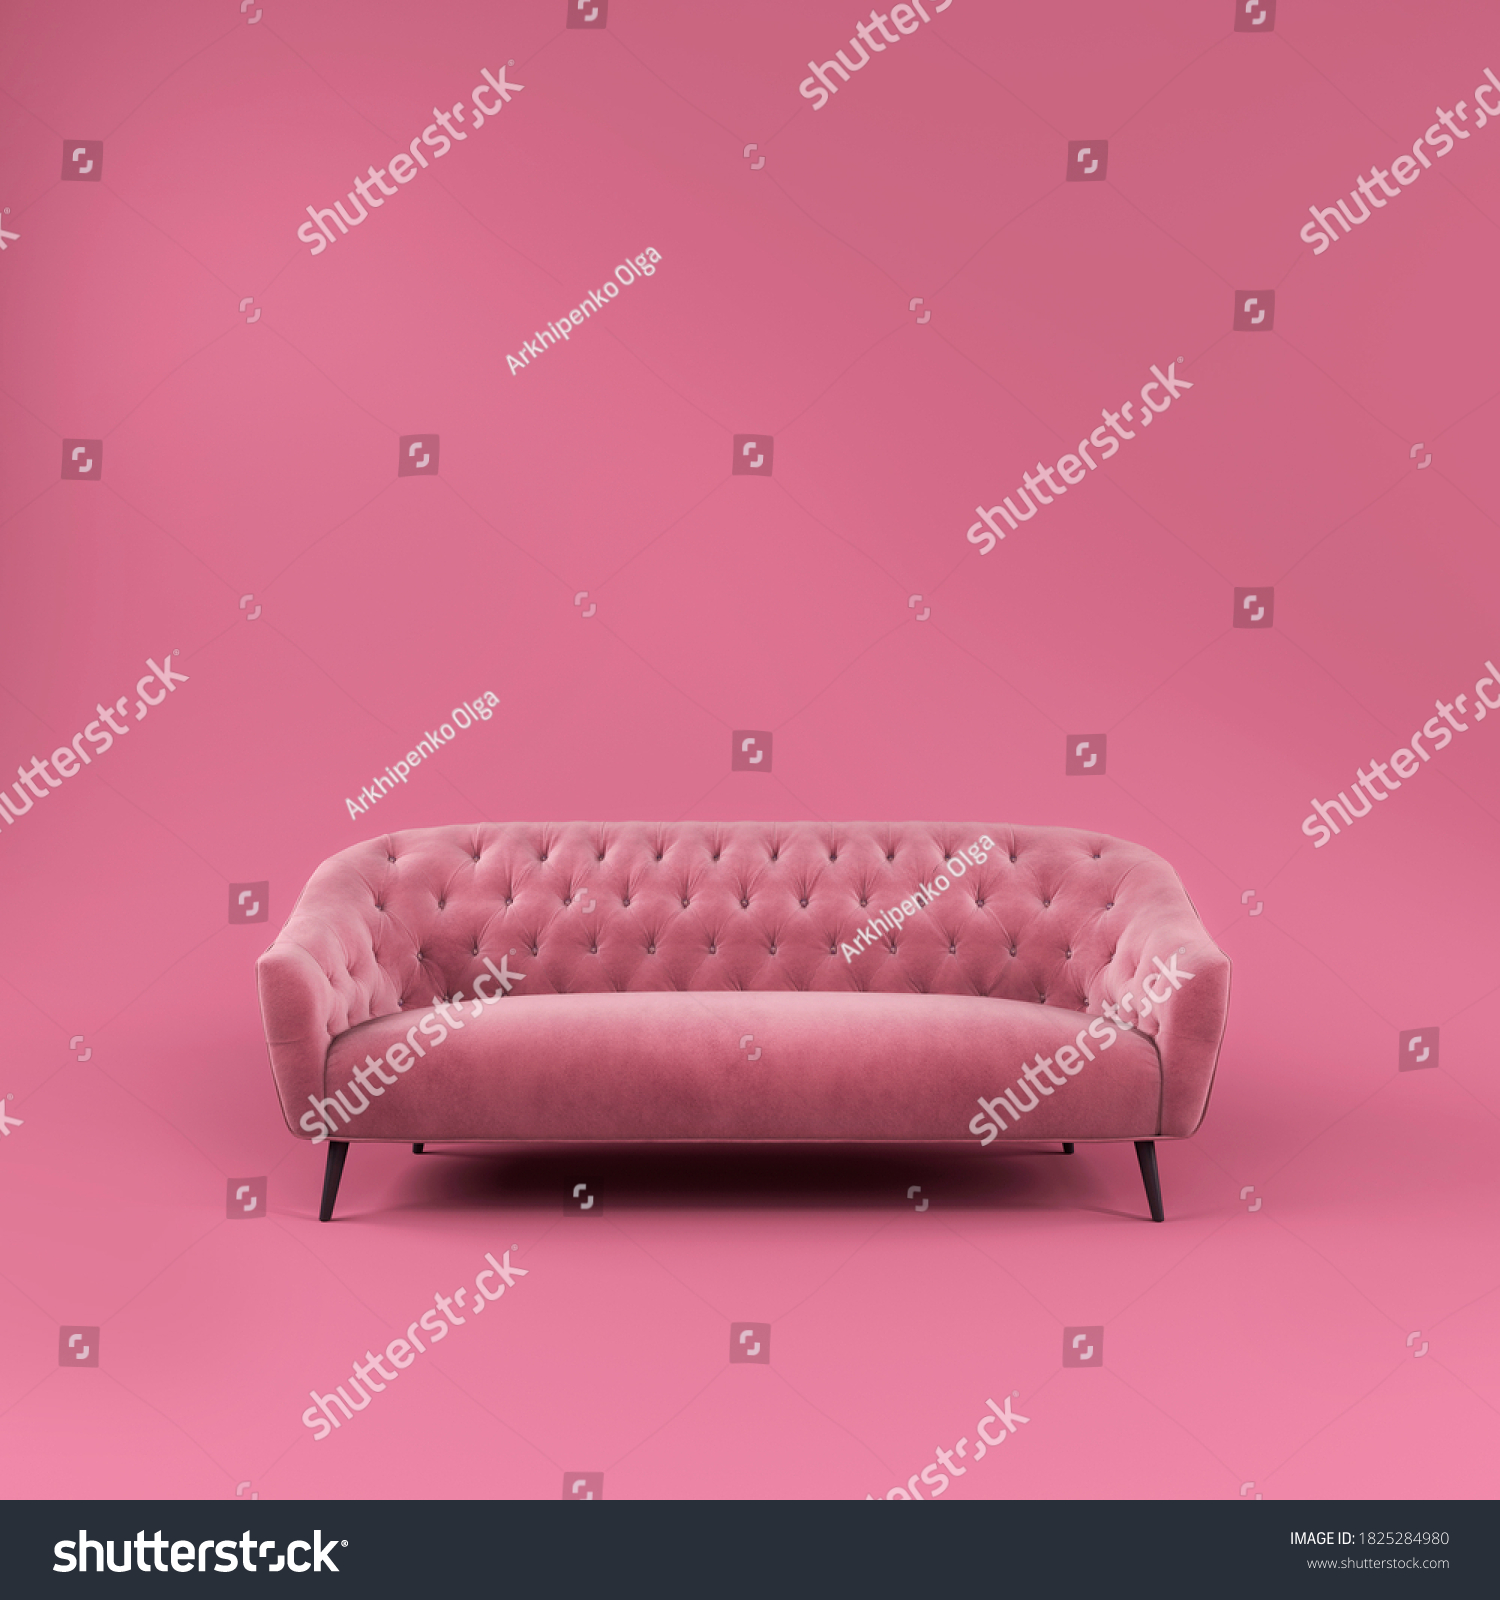 Fashionable comfortable stylish pink fabric sofa with black legs on pink background with shadow. Pink interior, showroom, single piece of furniture. Vilyura, velvet sofa. Luxury couch front view #1825284980